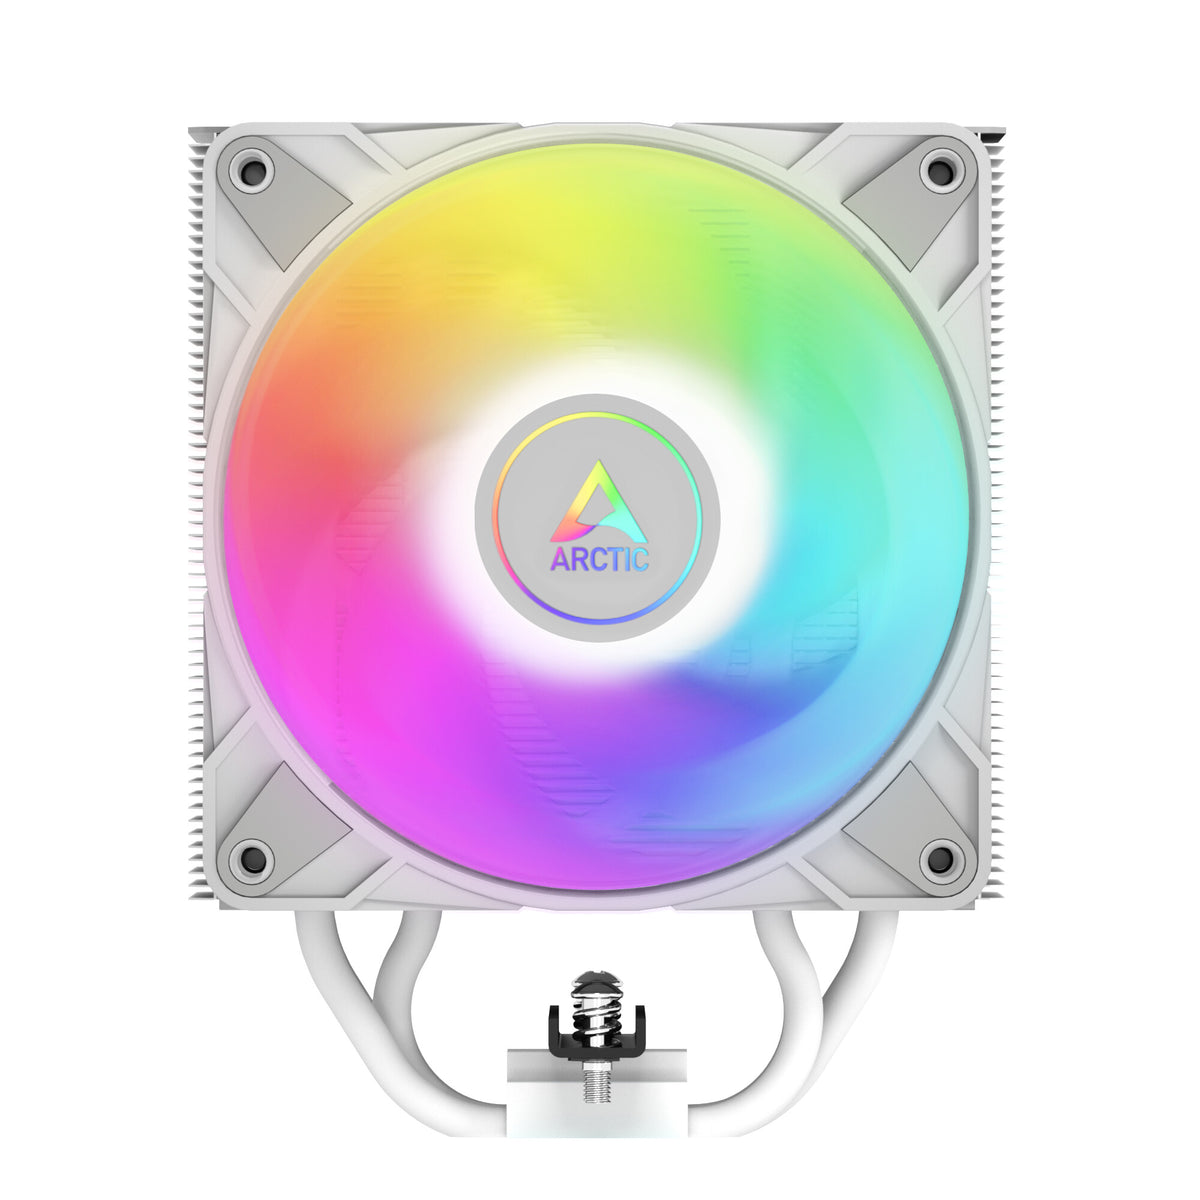 ARCTIC Freezer 36 A-RGB - Air Processor Cooler in White - 120mm